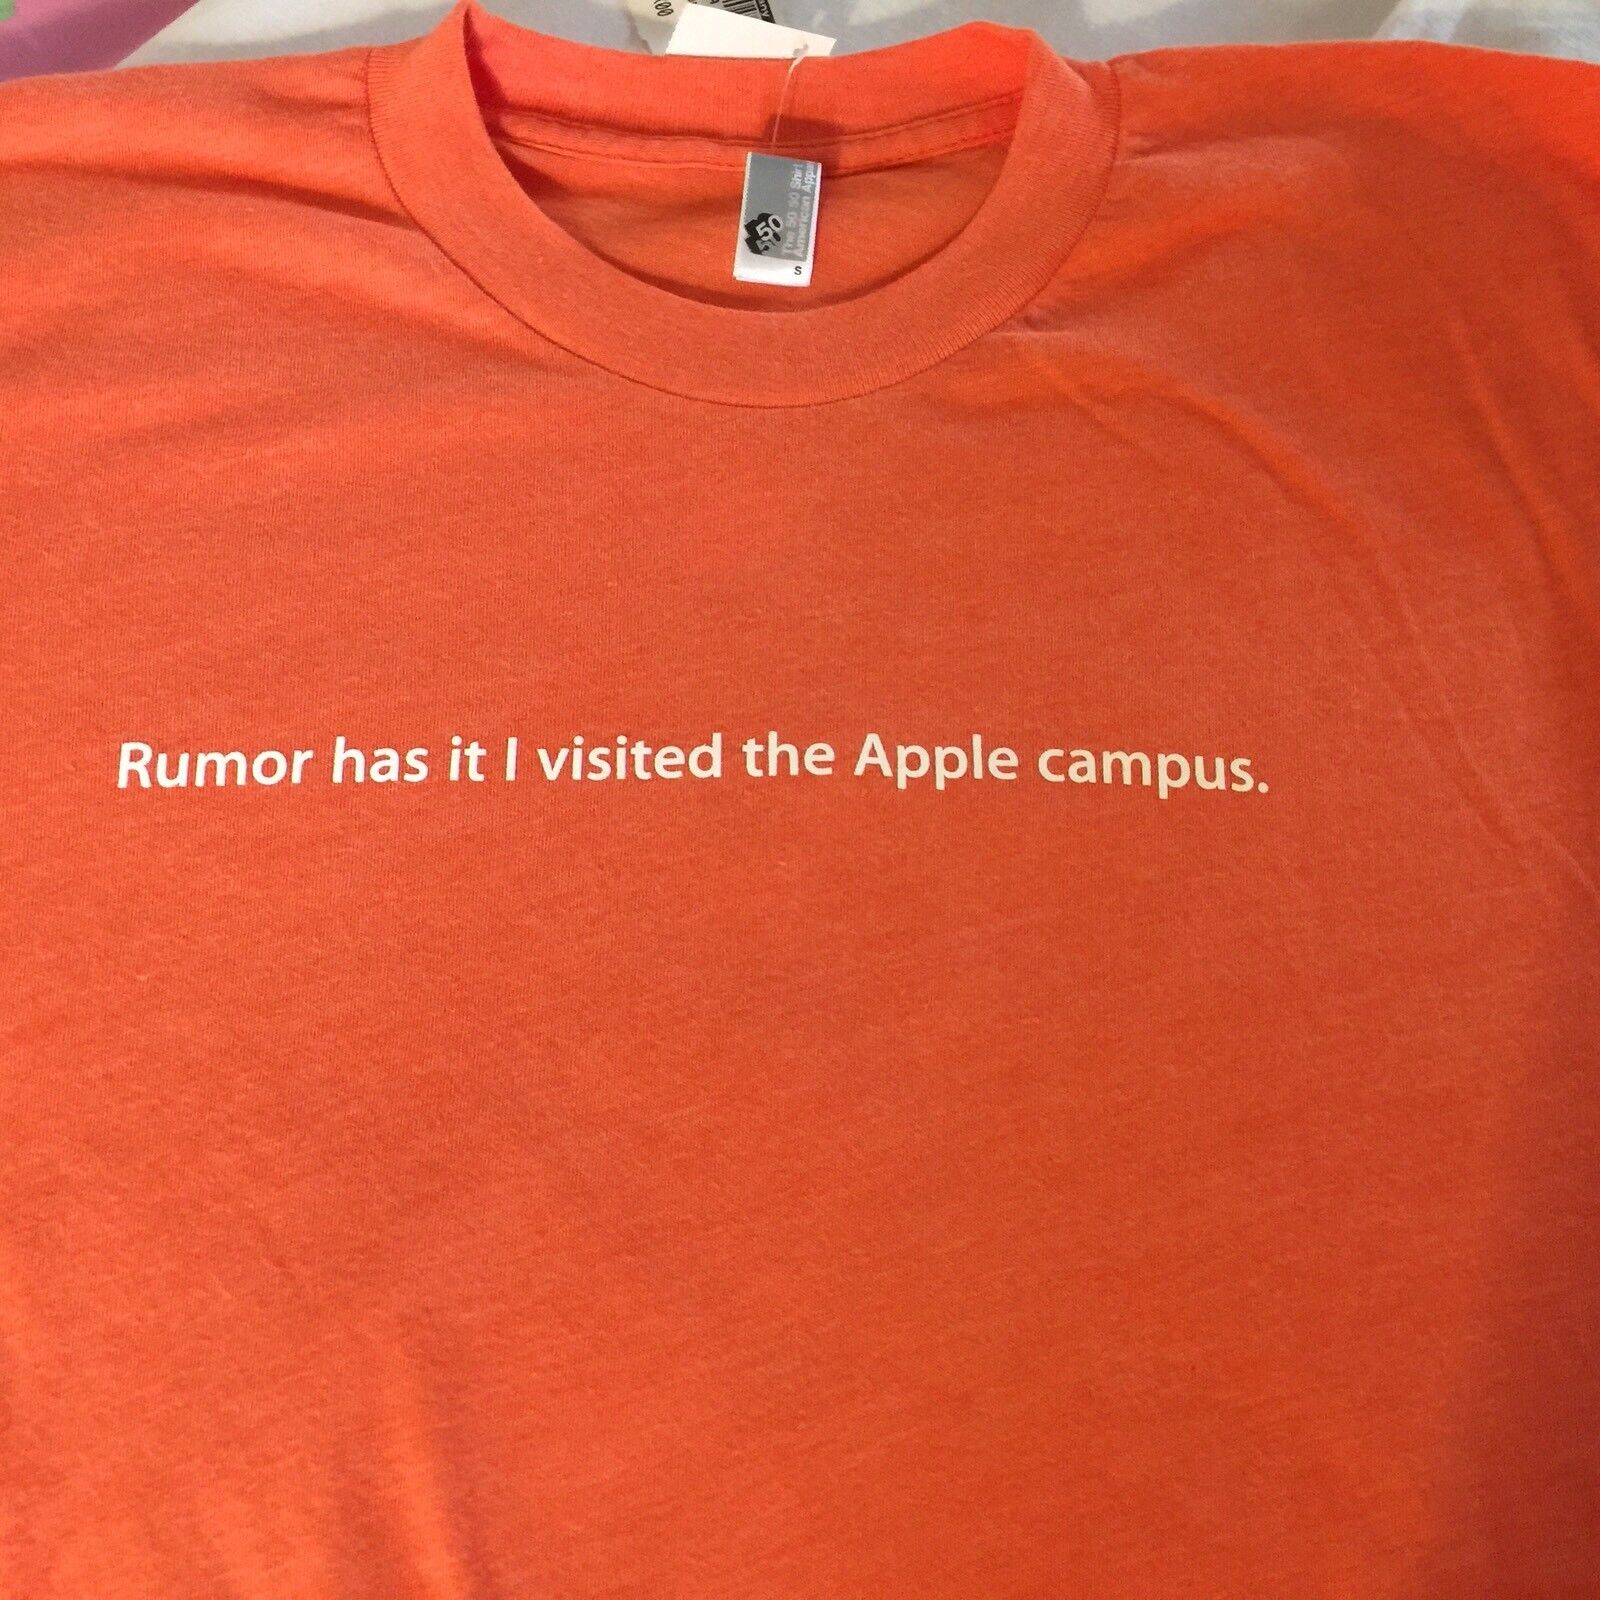 NWT OOP APPLE CAMPUS COMPANY STORE LOGO SZ SMALL ORANGE T-SHIRT~not iPHONE 15